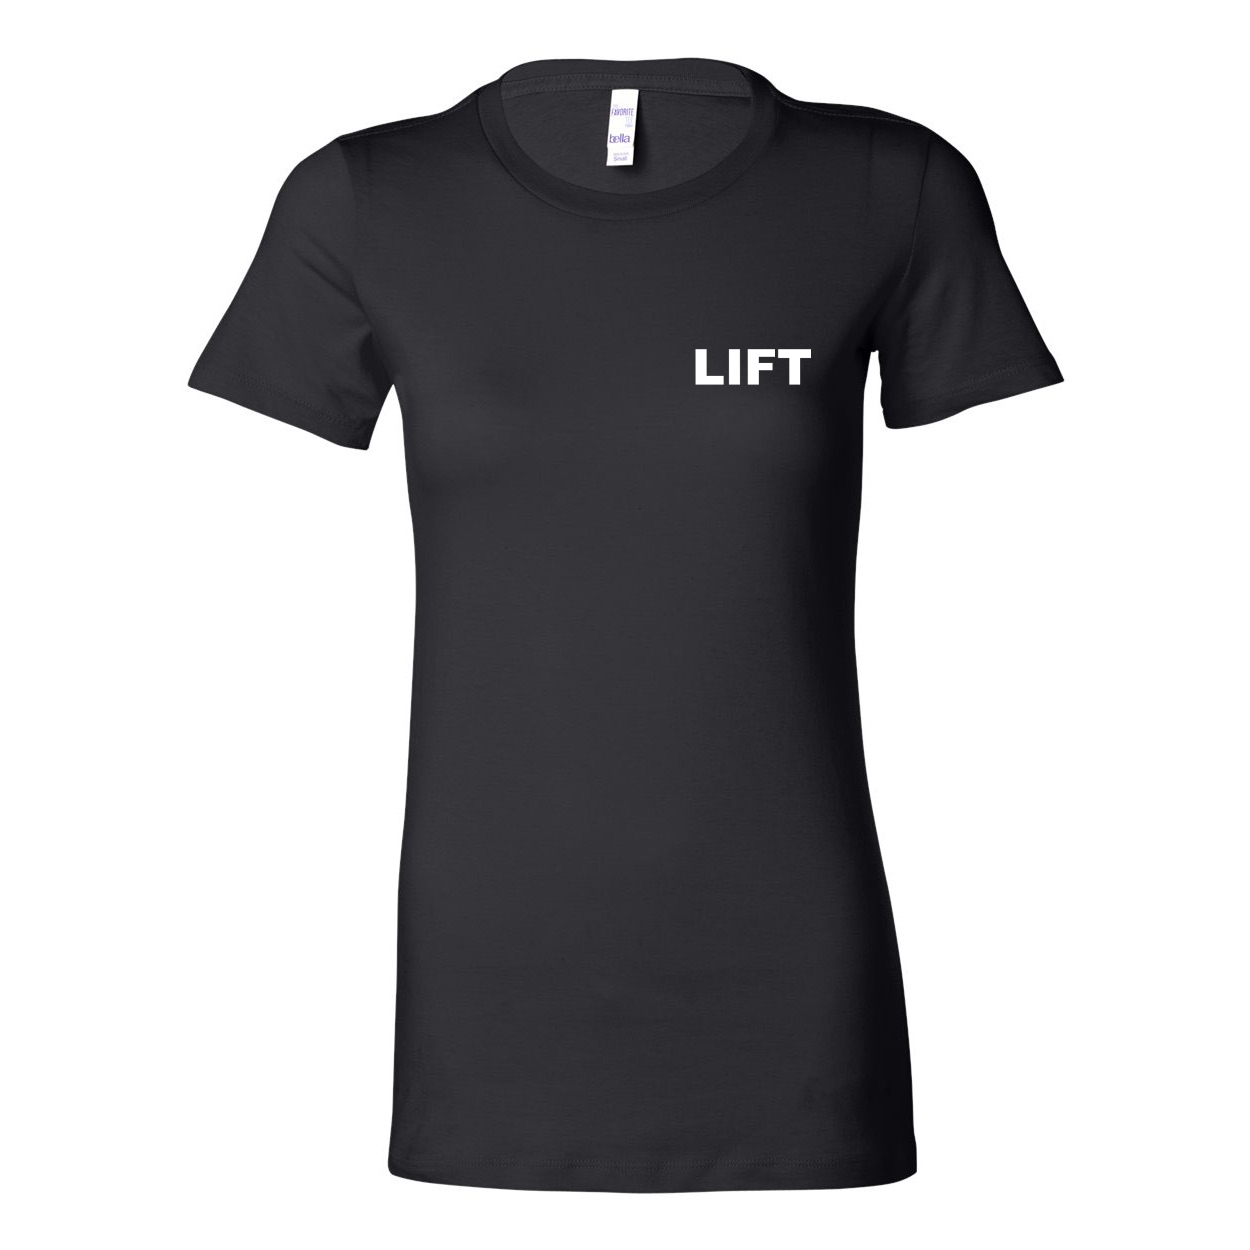 Lift Brand Logo Women's Night Out Fitted Tri-Blend T-Shirt Black